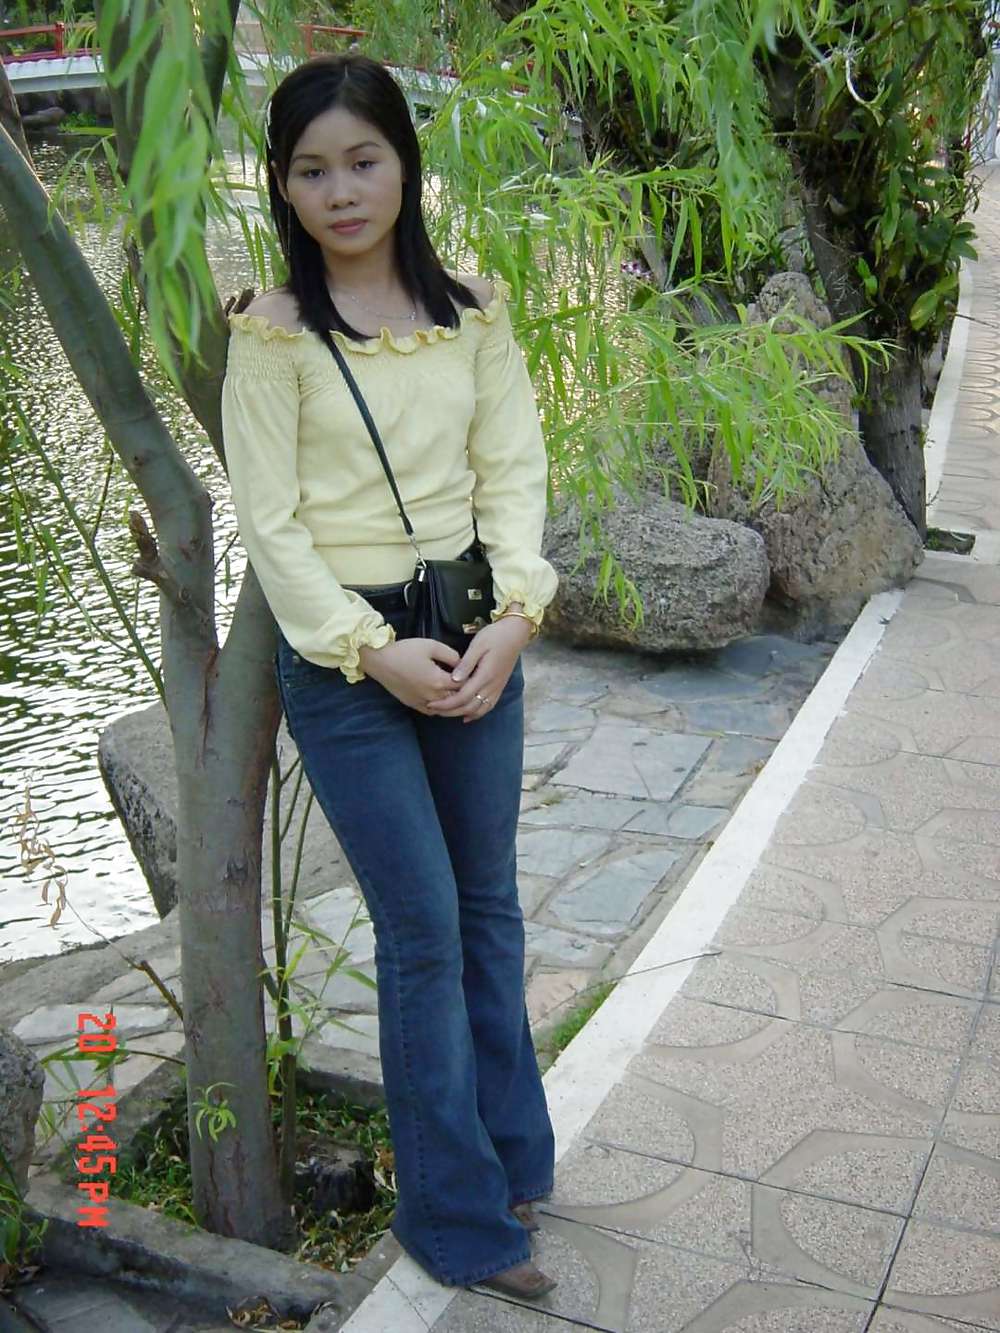 Chinese Girls Part 5 adult photos